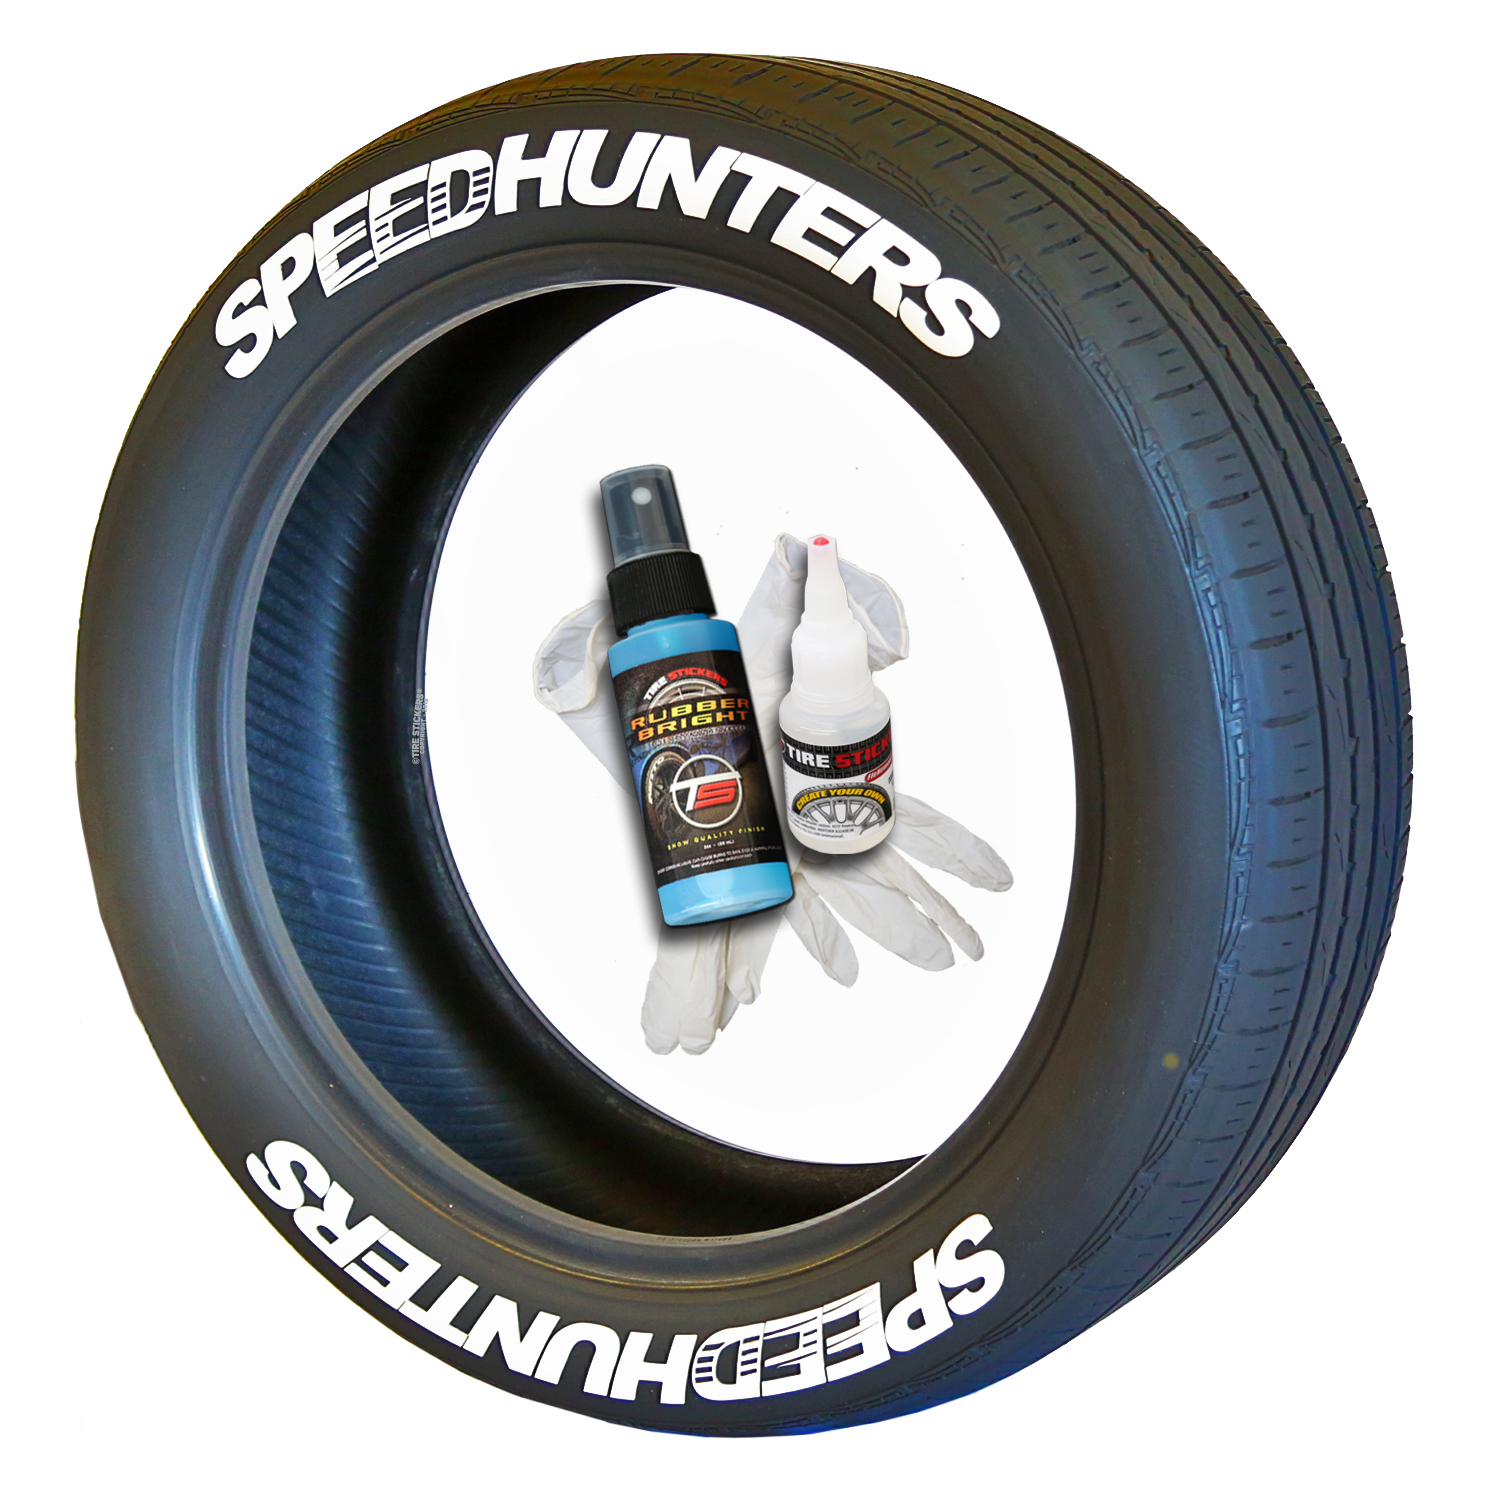 https://www.tirestickers.com/wp-content/uploads/2018/10/SPEEDHUNTERS-Tire-Stickers-with-glue-and-gloves-white.jpg